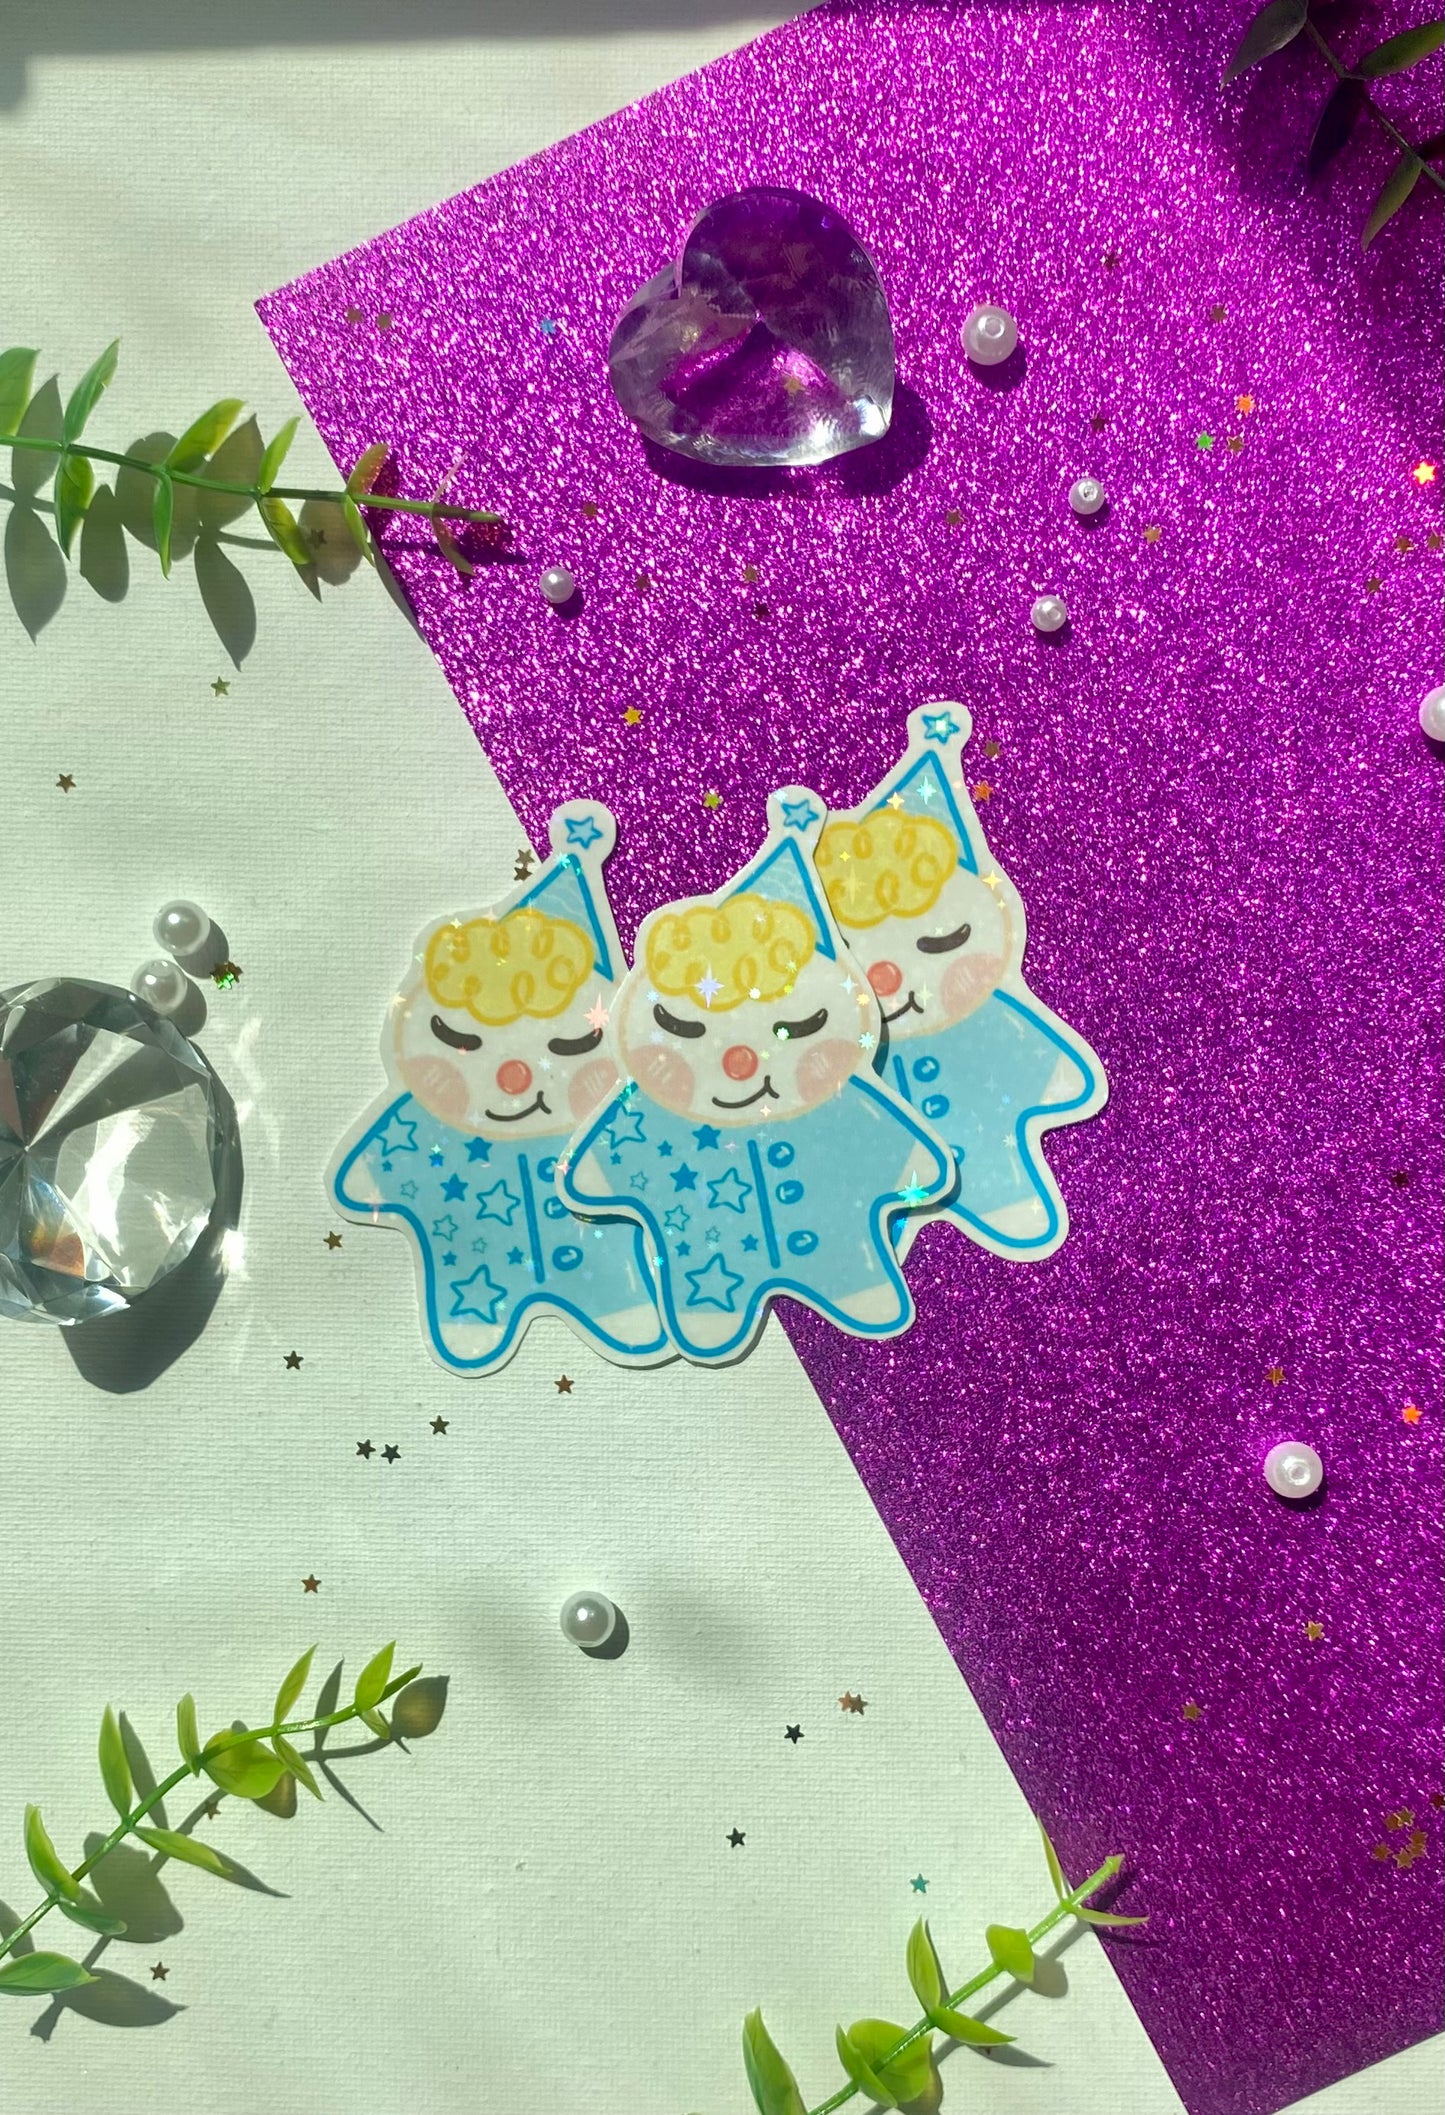 Holographic Bedtime Sticker